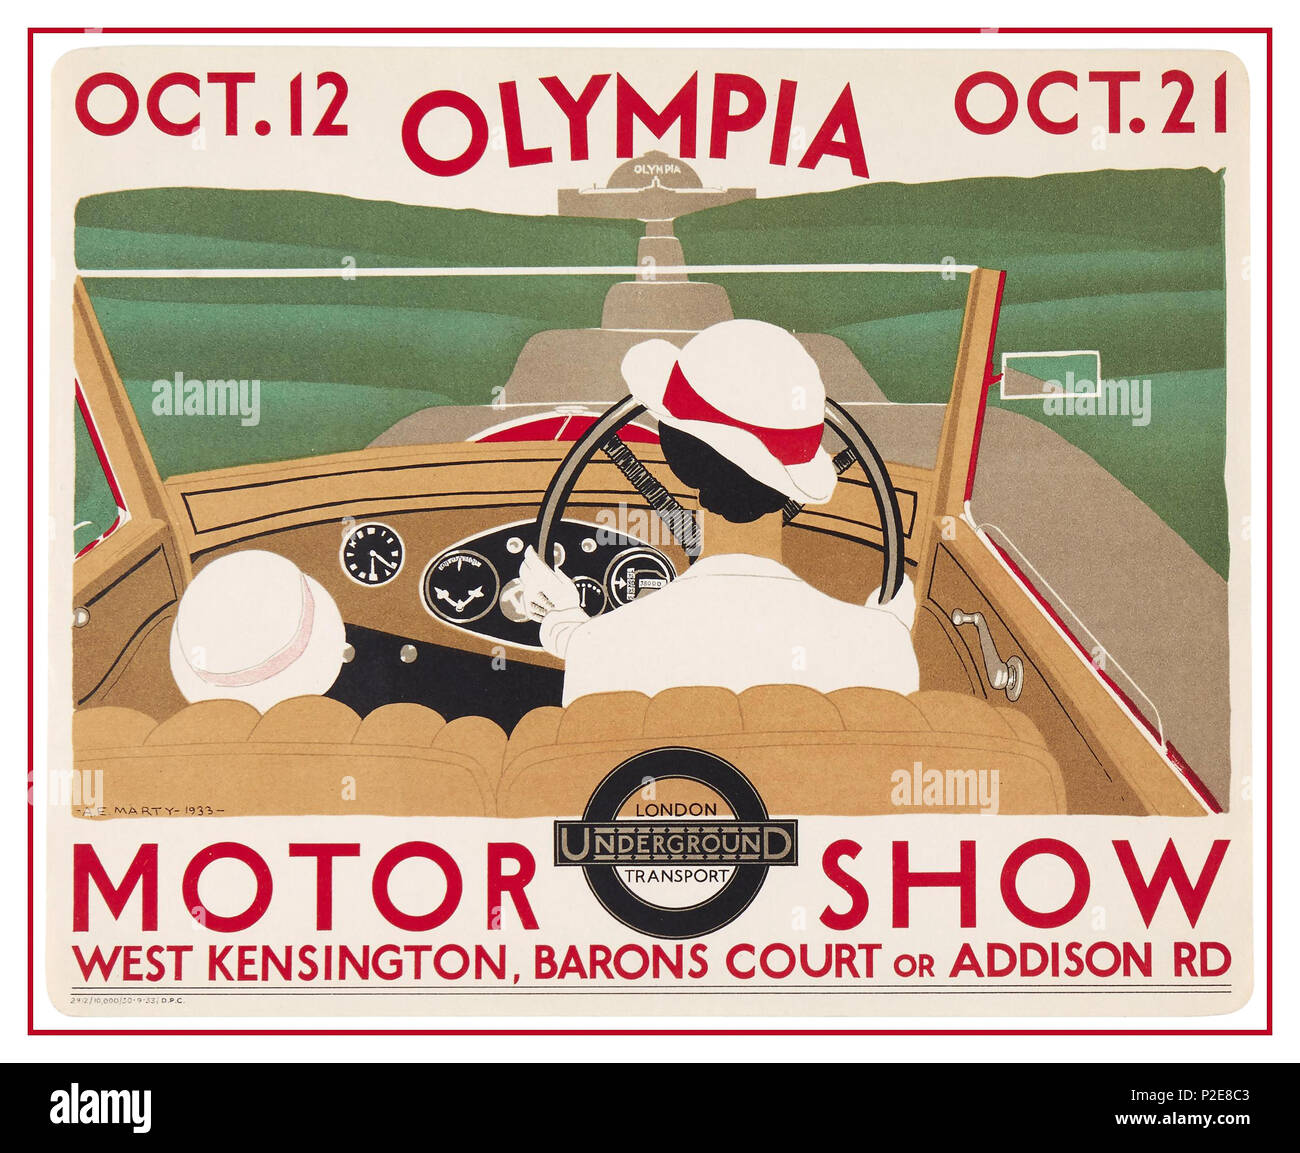 Vintage 1933 British Motor Show Poster at Olympia Oct 12-21 via London Transport Tube Underground network Nearest stations West Kensington Barons Court Addison Rd. West London Stock Photo